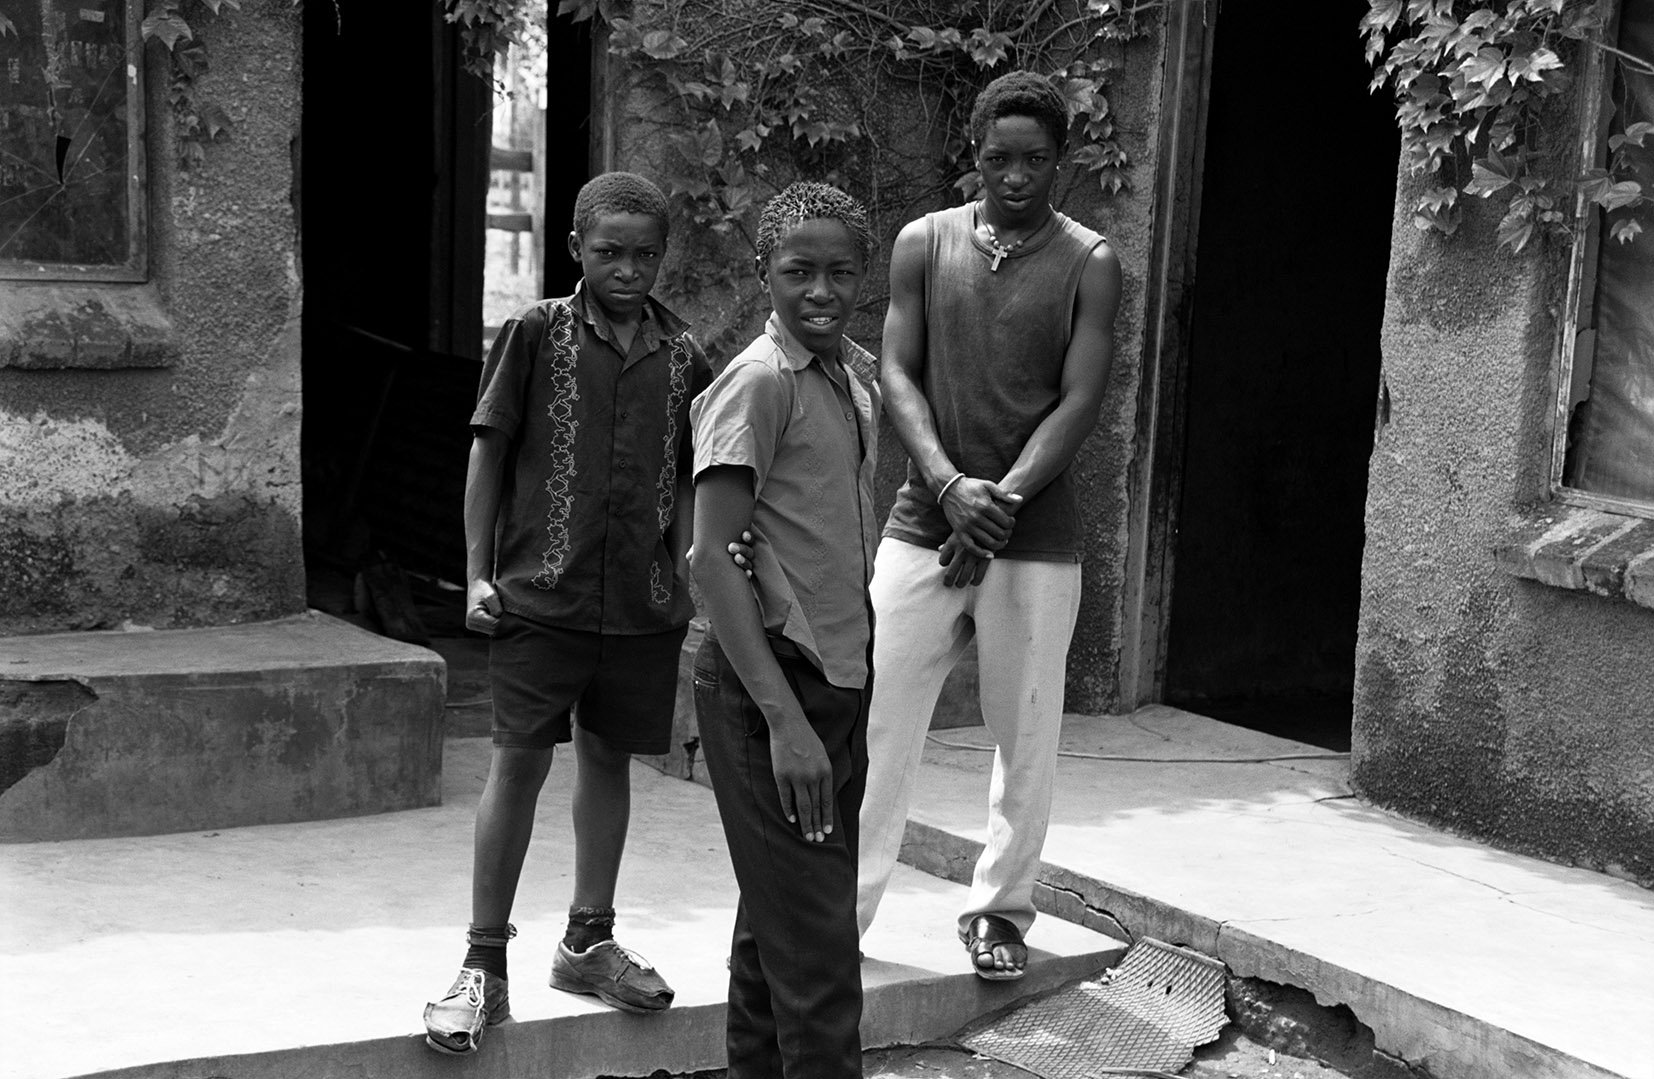  Nousta, Rister and Noupa Mkansi at home in Dan, Tzaneen. Their parents Richard (b. 1965) and Onica (b. 1970) are both dead/ 2007 